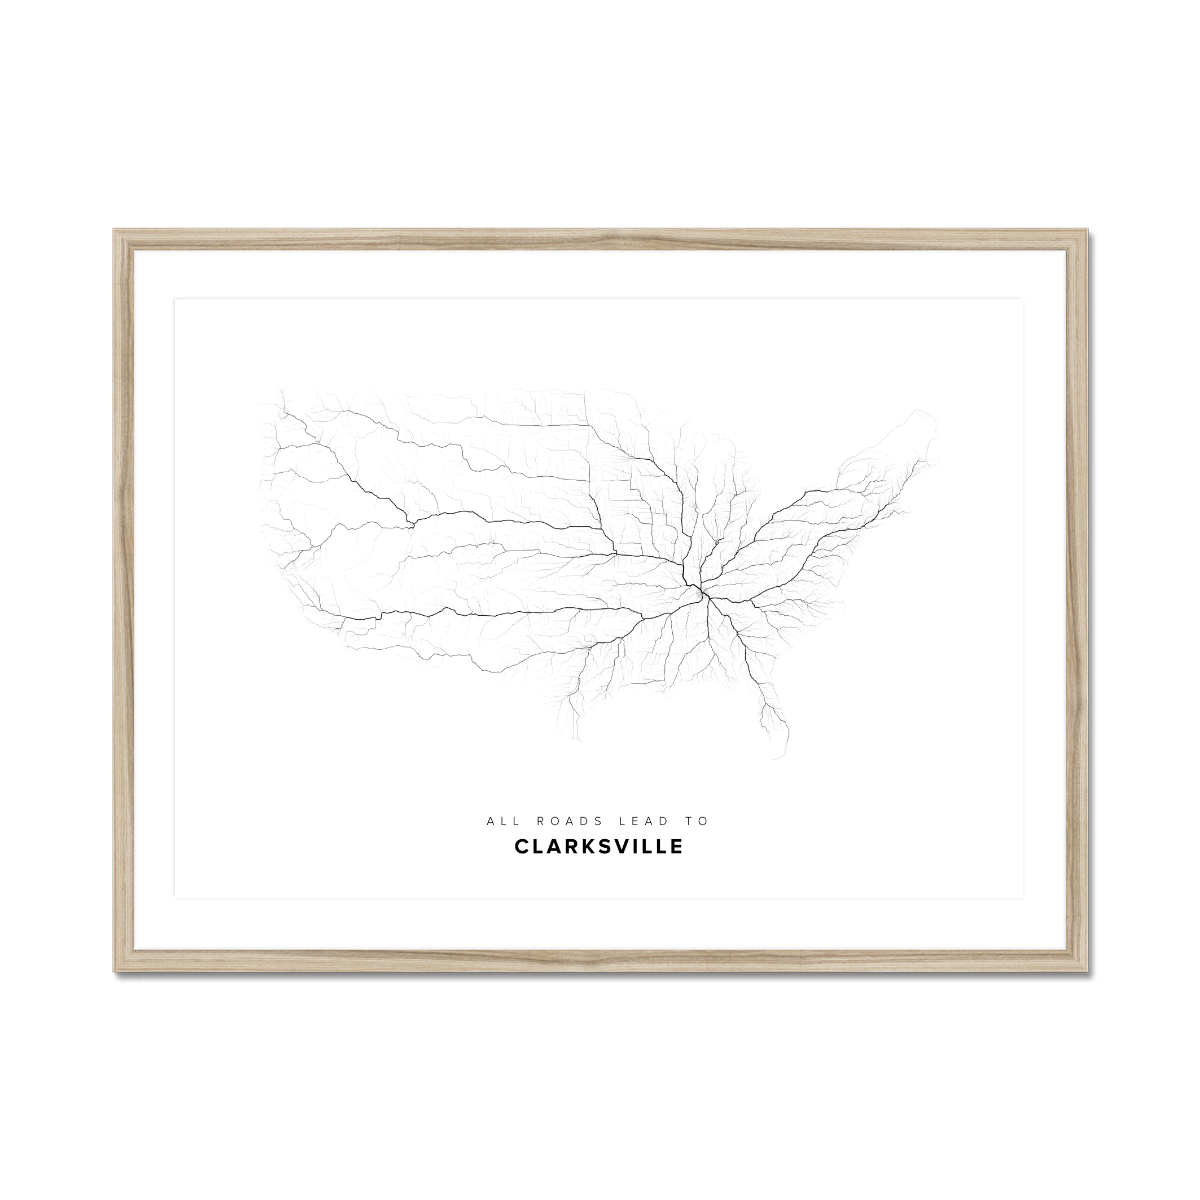 All roads lead to Clarksville (United States of America) Fine Art Map Print